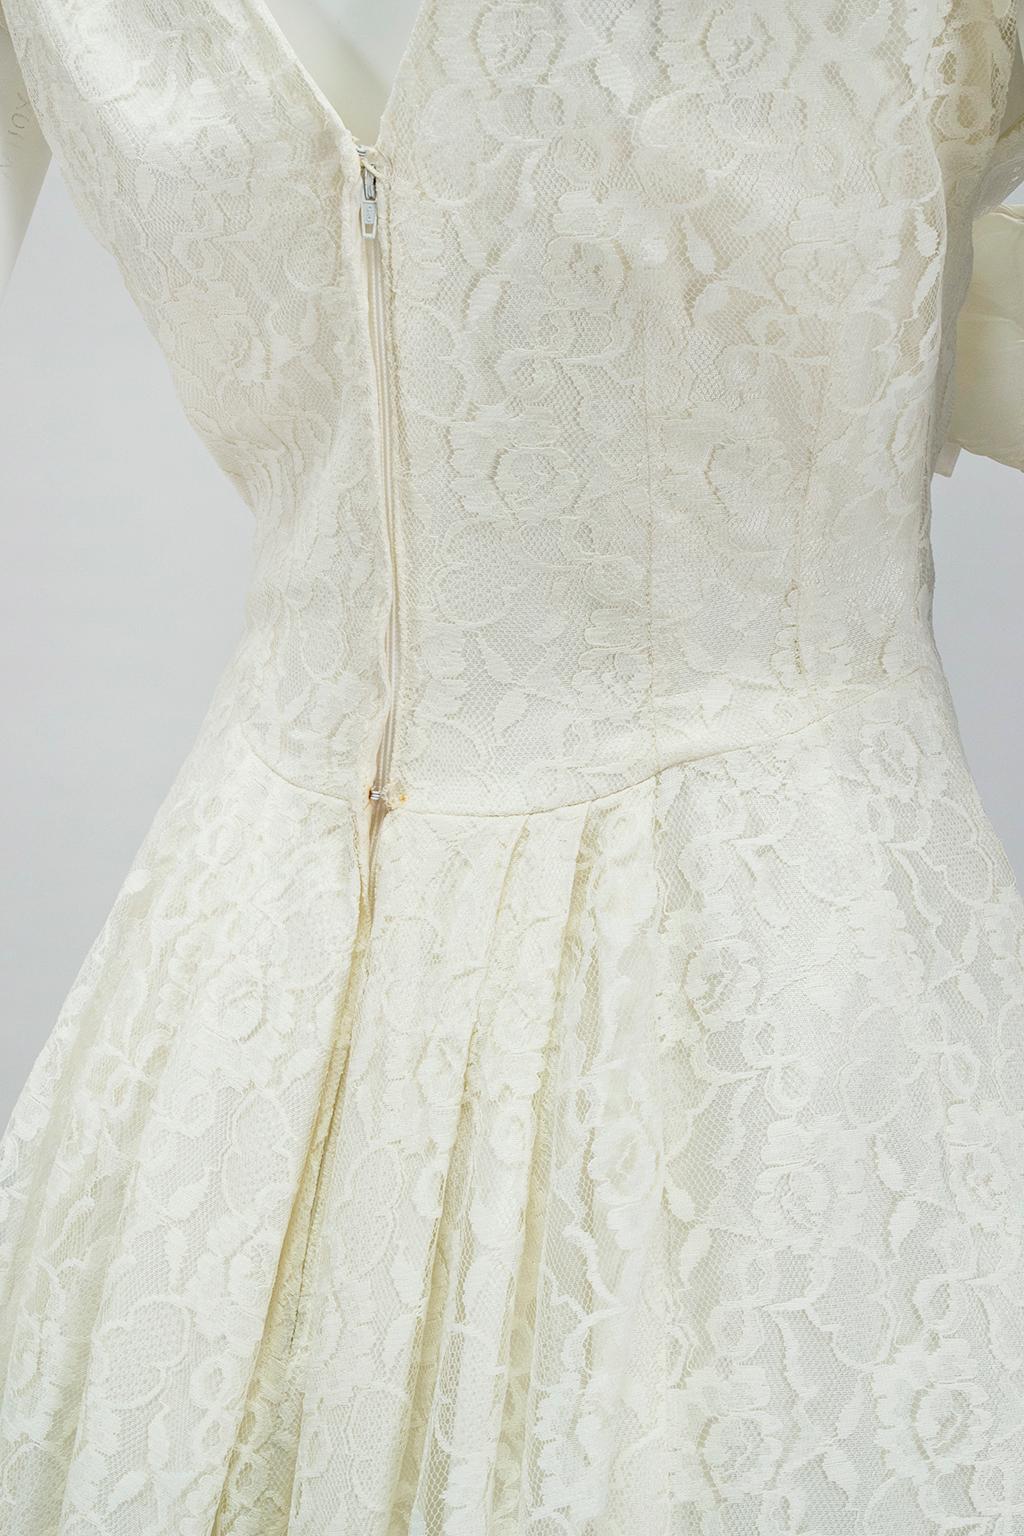 Emma Domb Ivory Floor Length Bateau Neck Wedding Gown with Empire Bow - S, 1950s For Sale 2